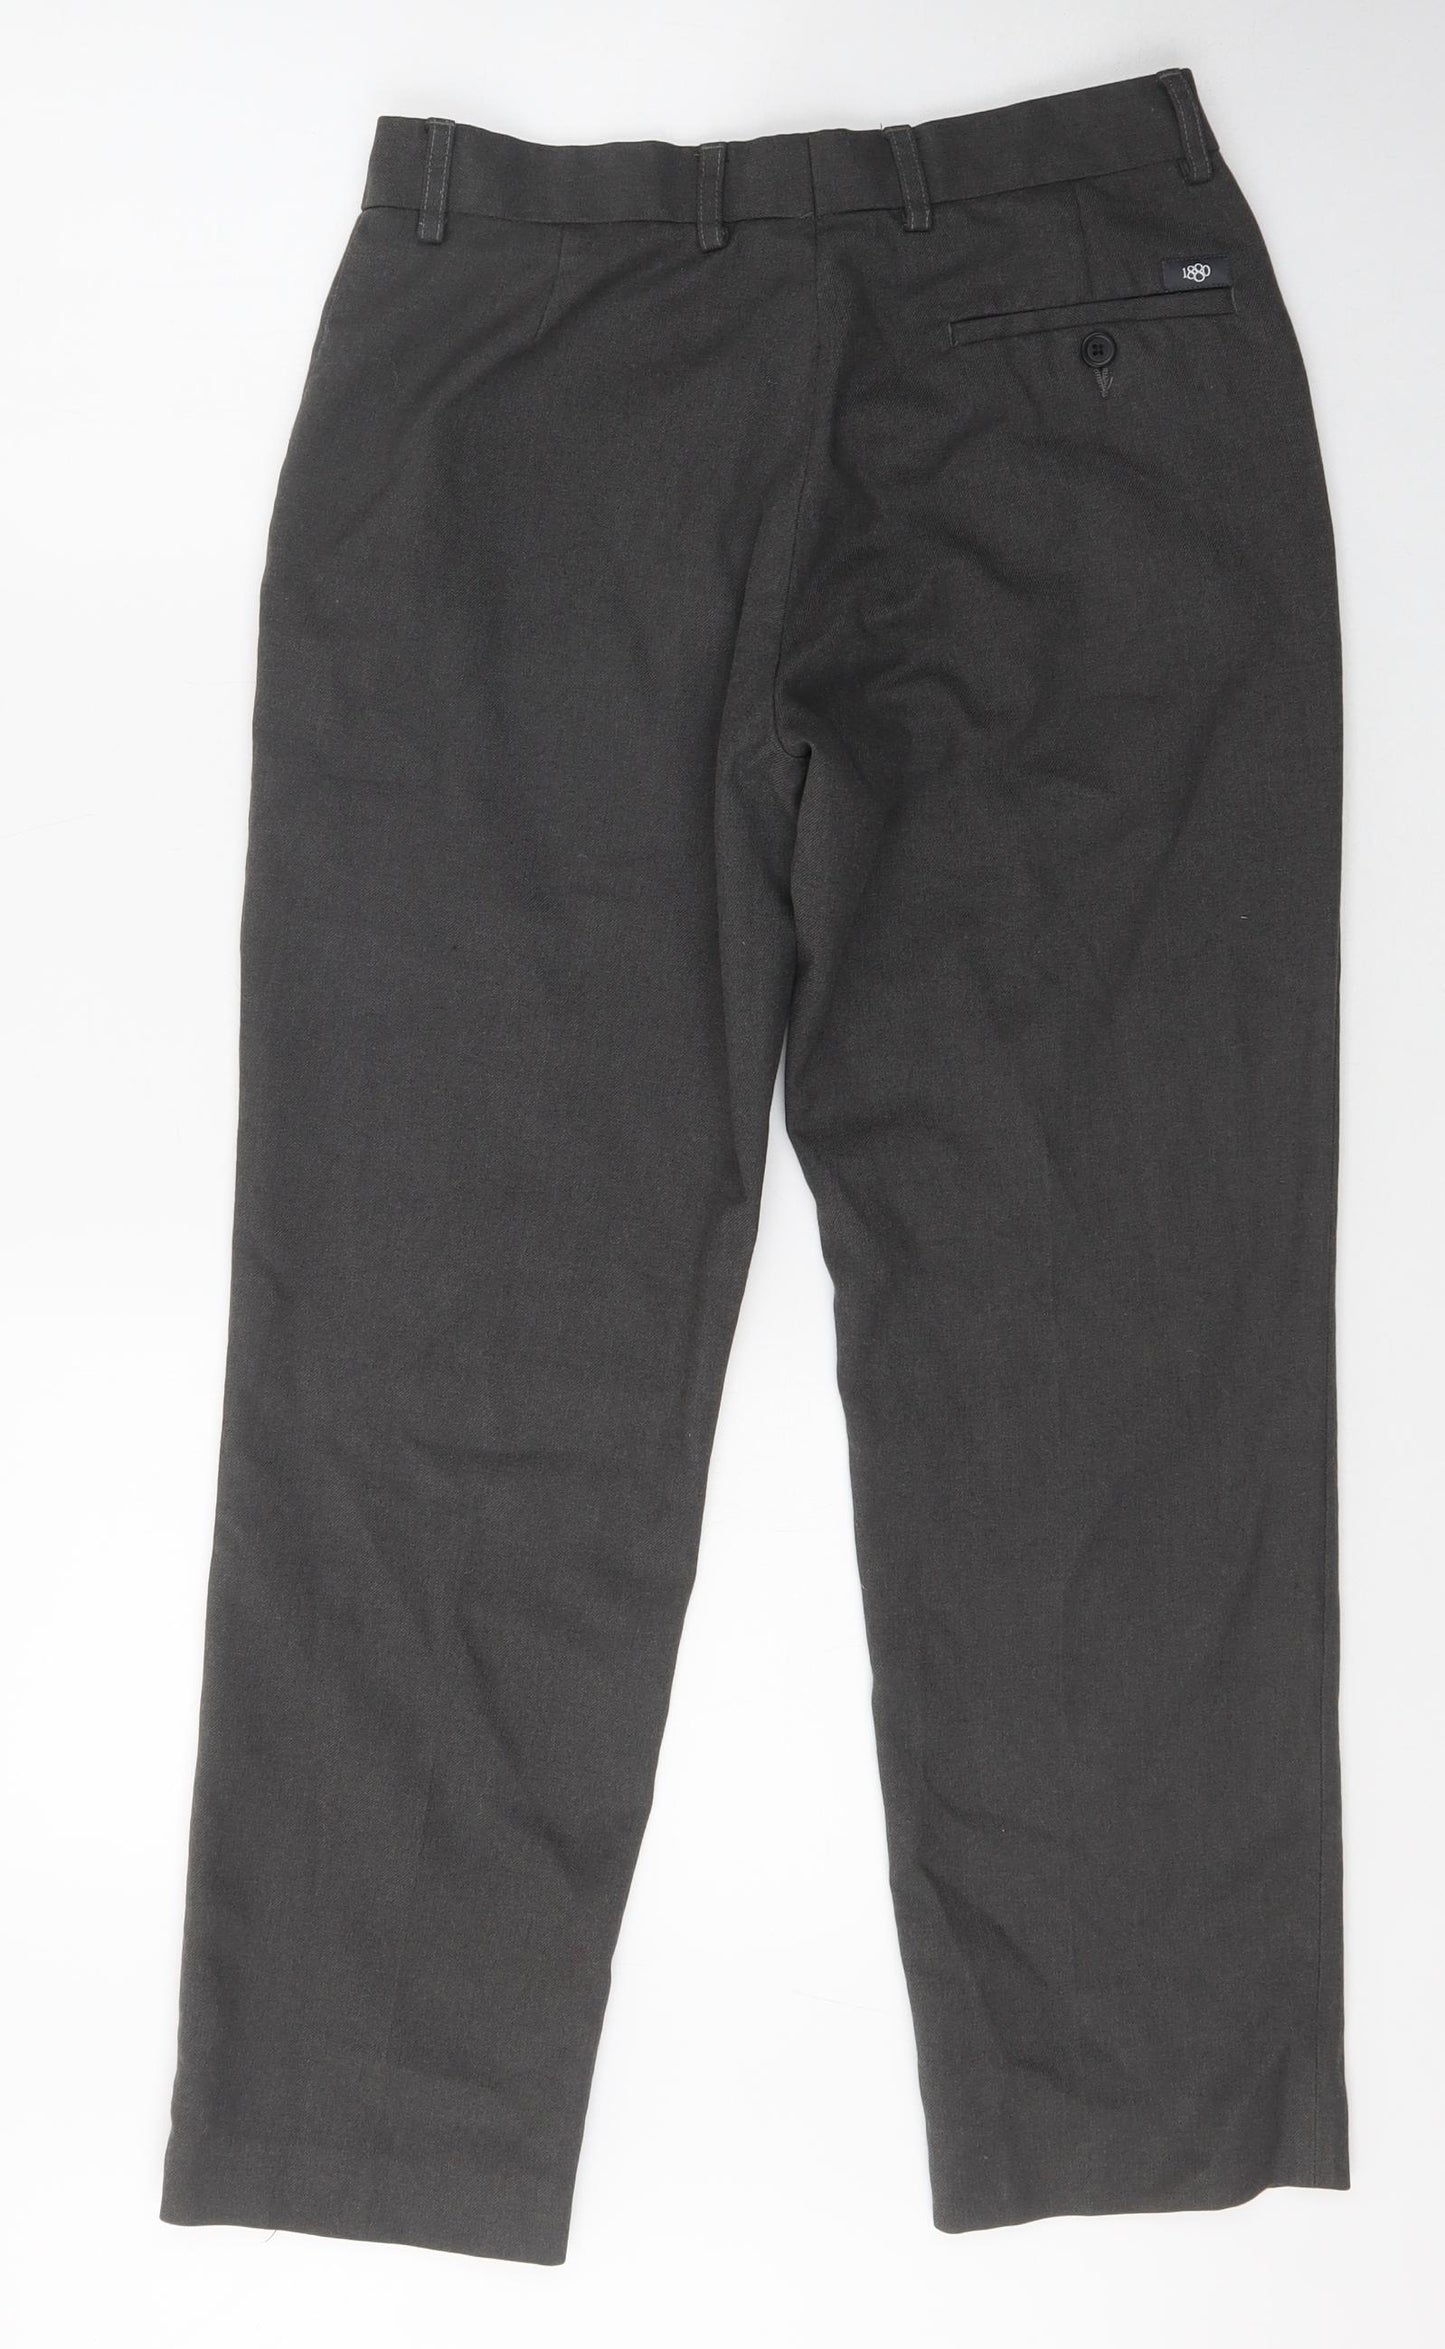 1880 club Mens Grey  Polyester Dress Pants Trousers Size 30 L26 in Classic Zip